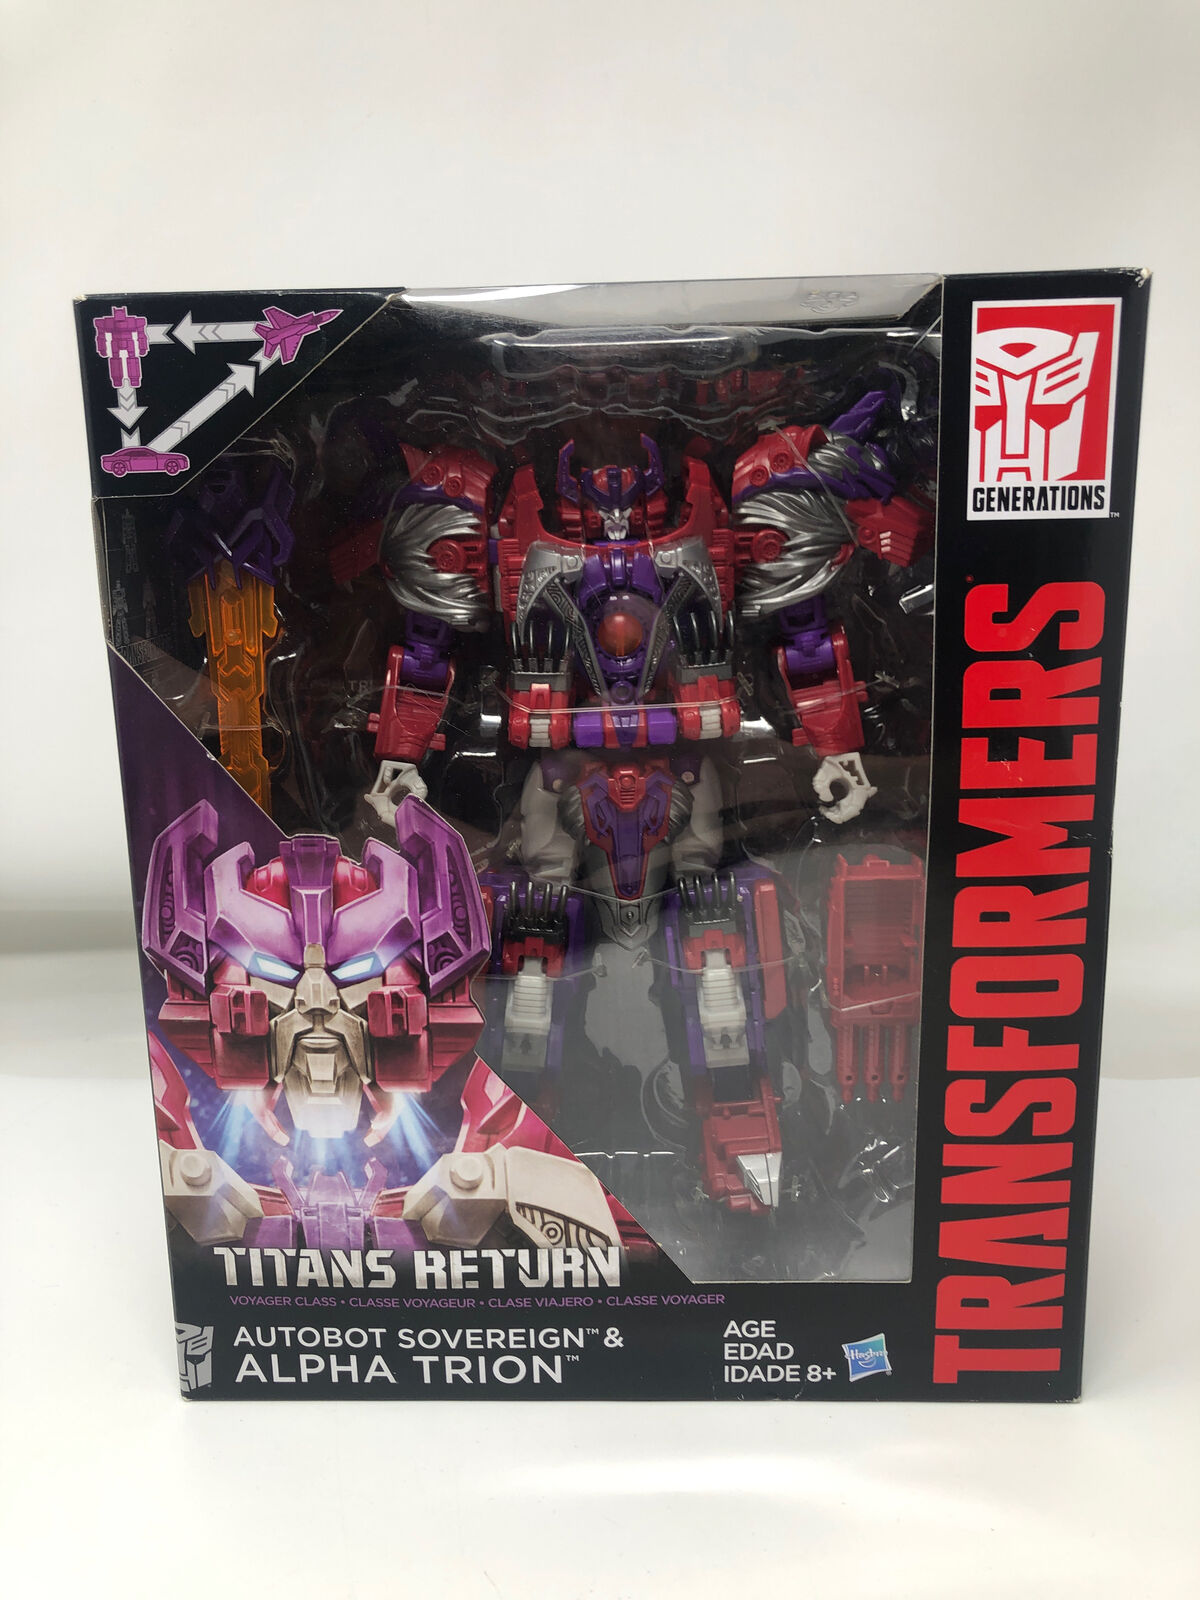 Transformers Generations Titans Return Autobot Sovereign and Alpha Trion